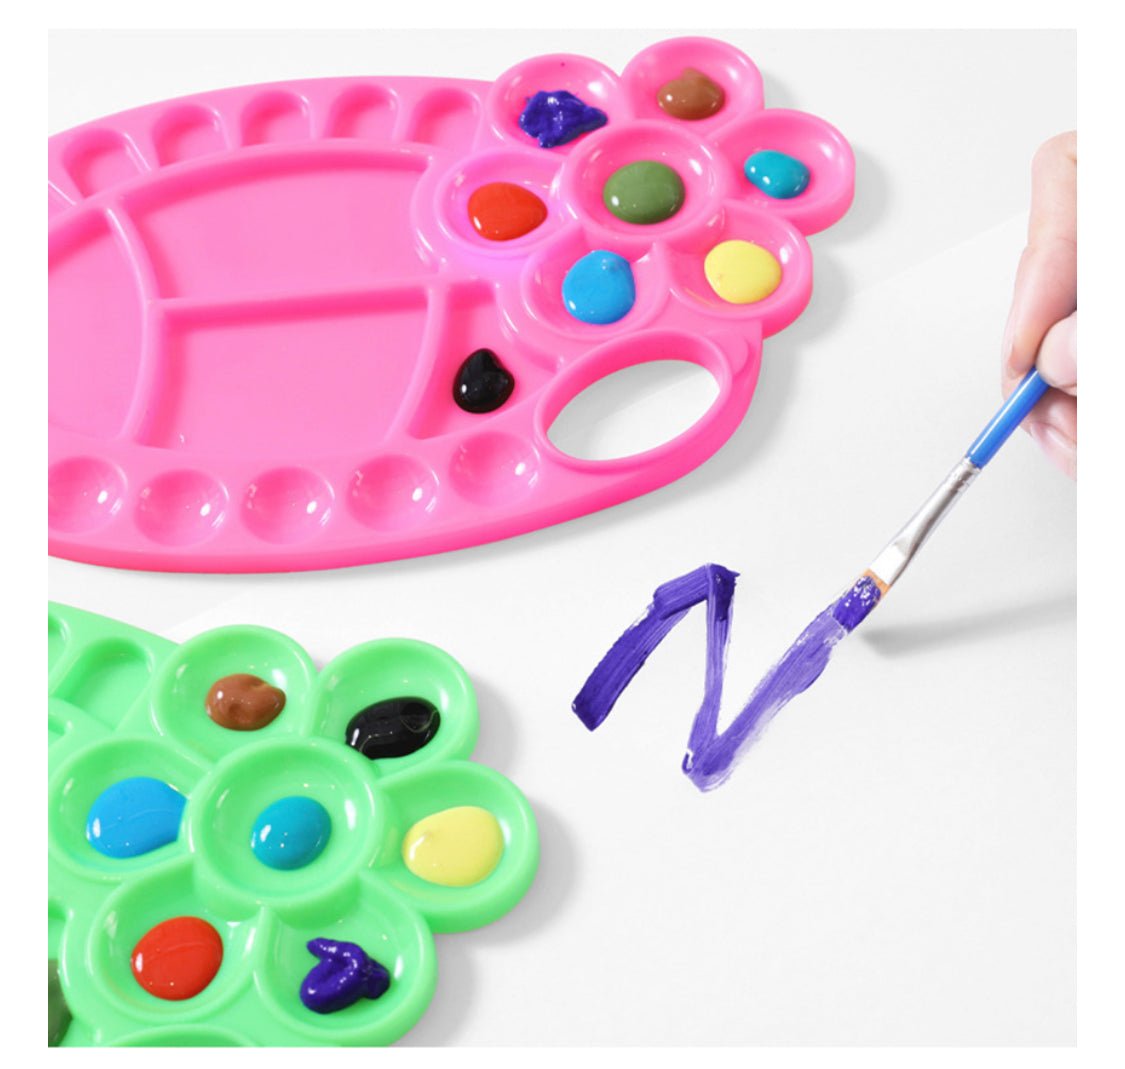 Color Mixing Plate Cake Tool - Effortless Color Mixing